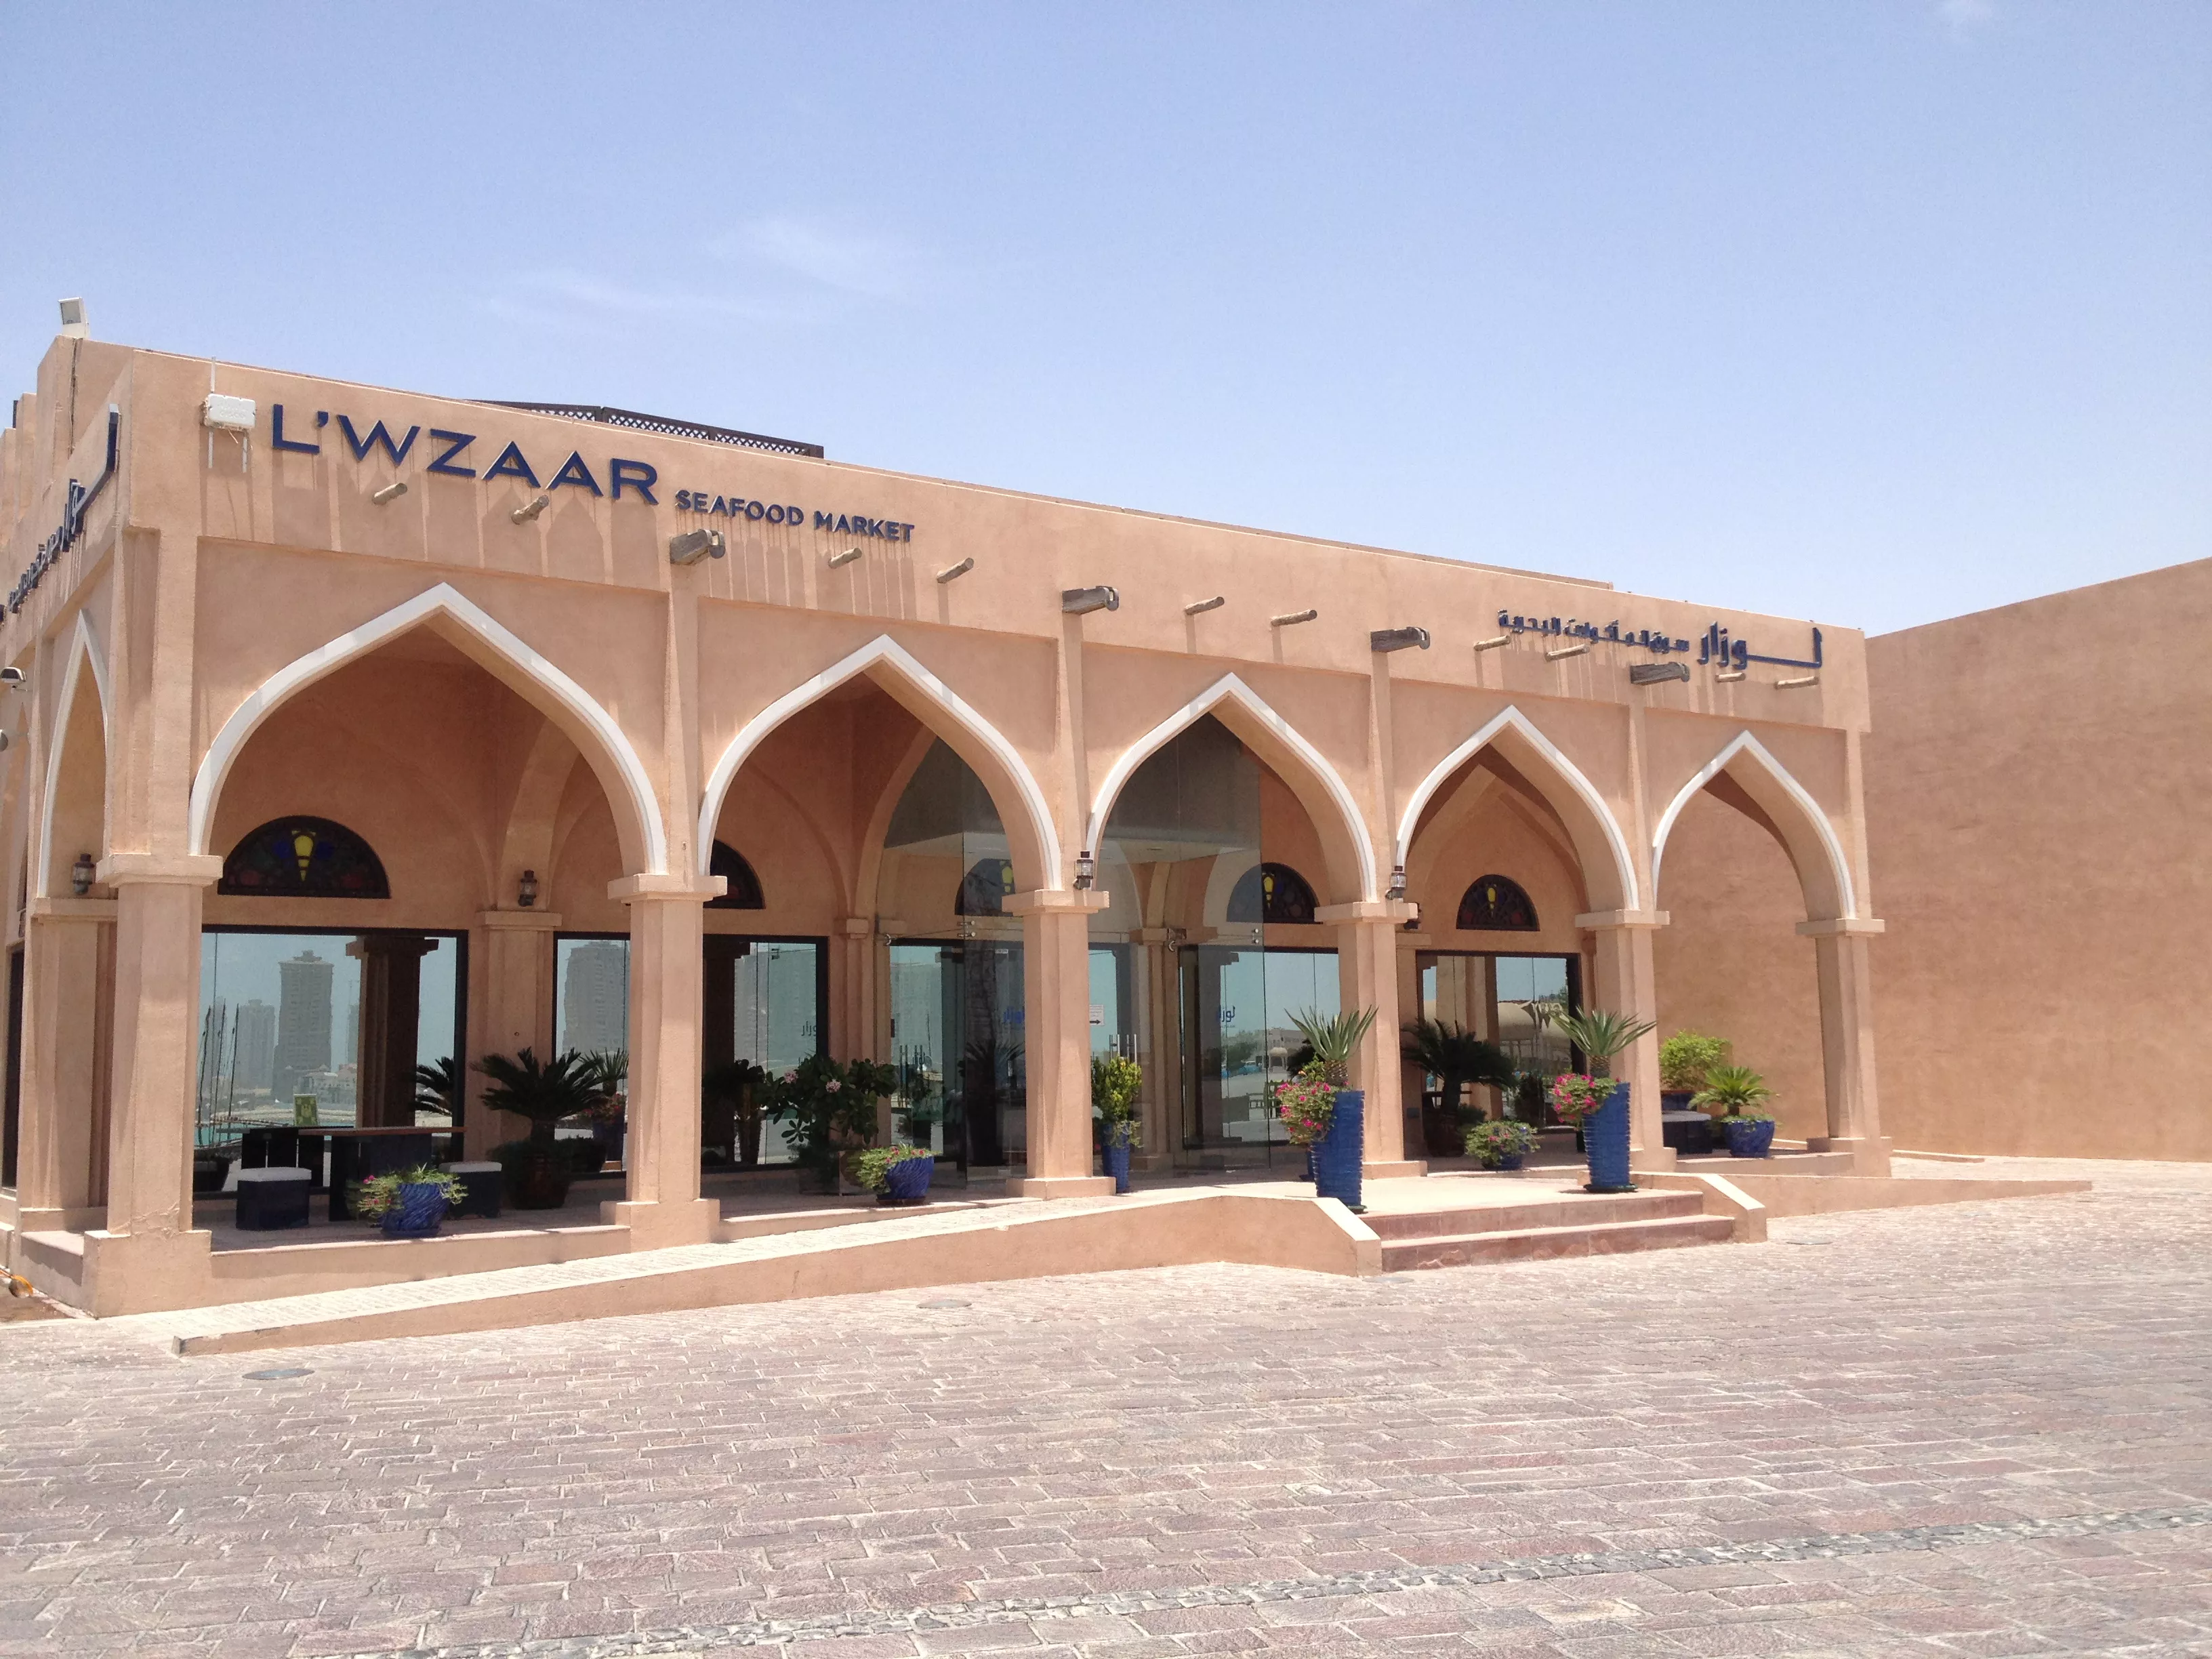 L'wzaar Seafood Market in Qatar, Middle East | Restaurants - Rated 3.8